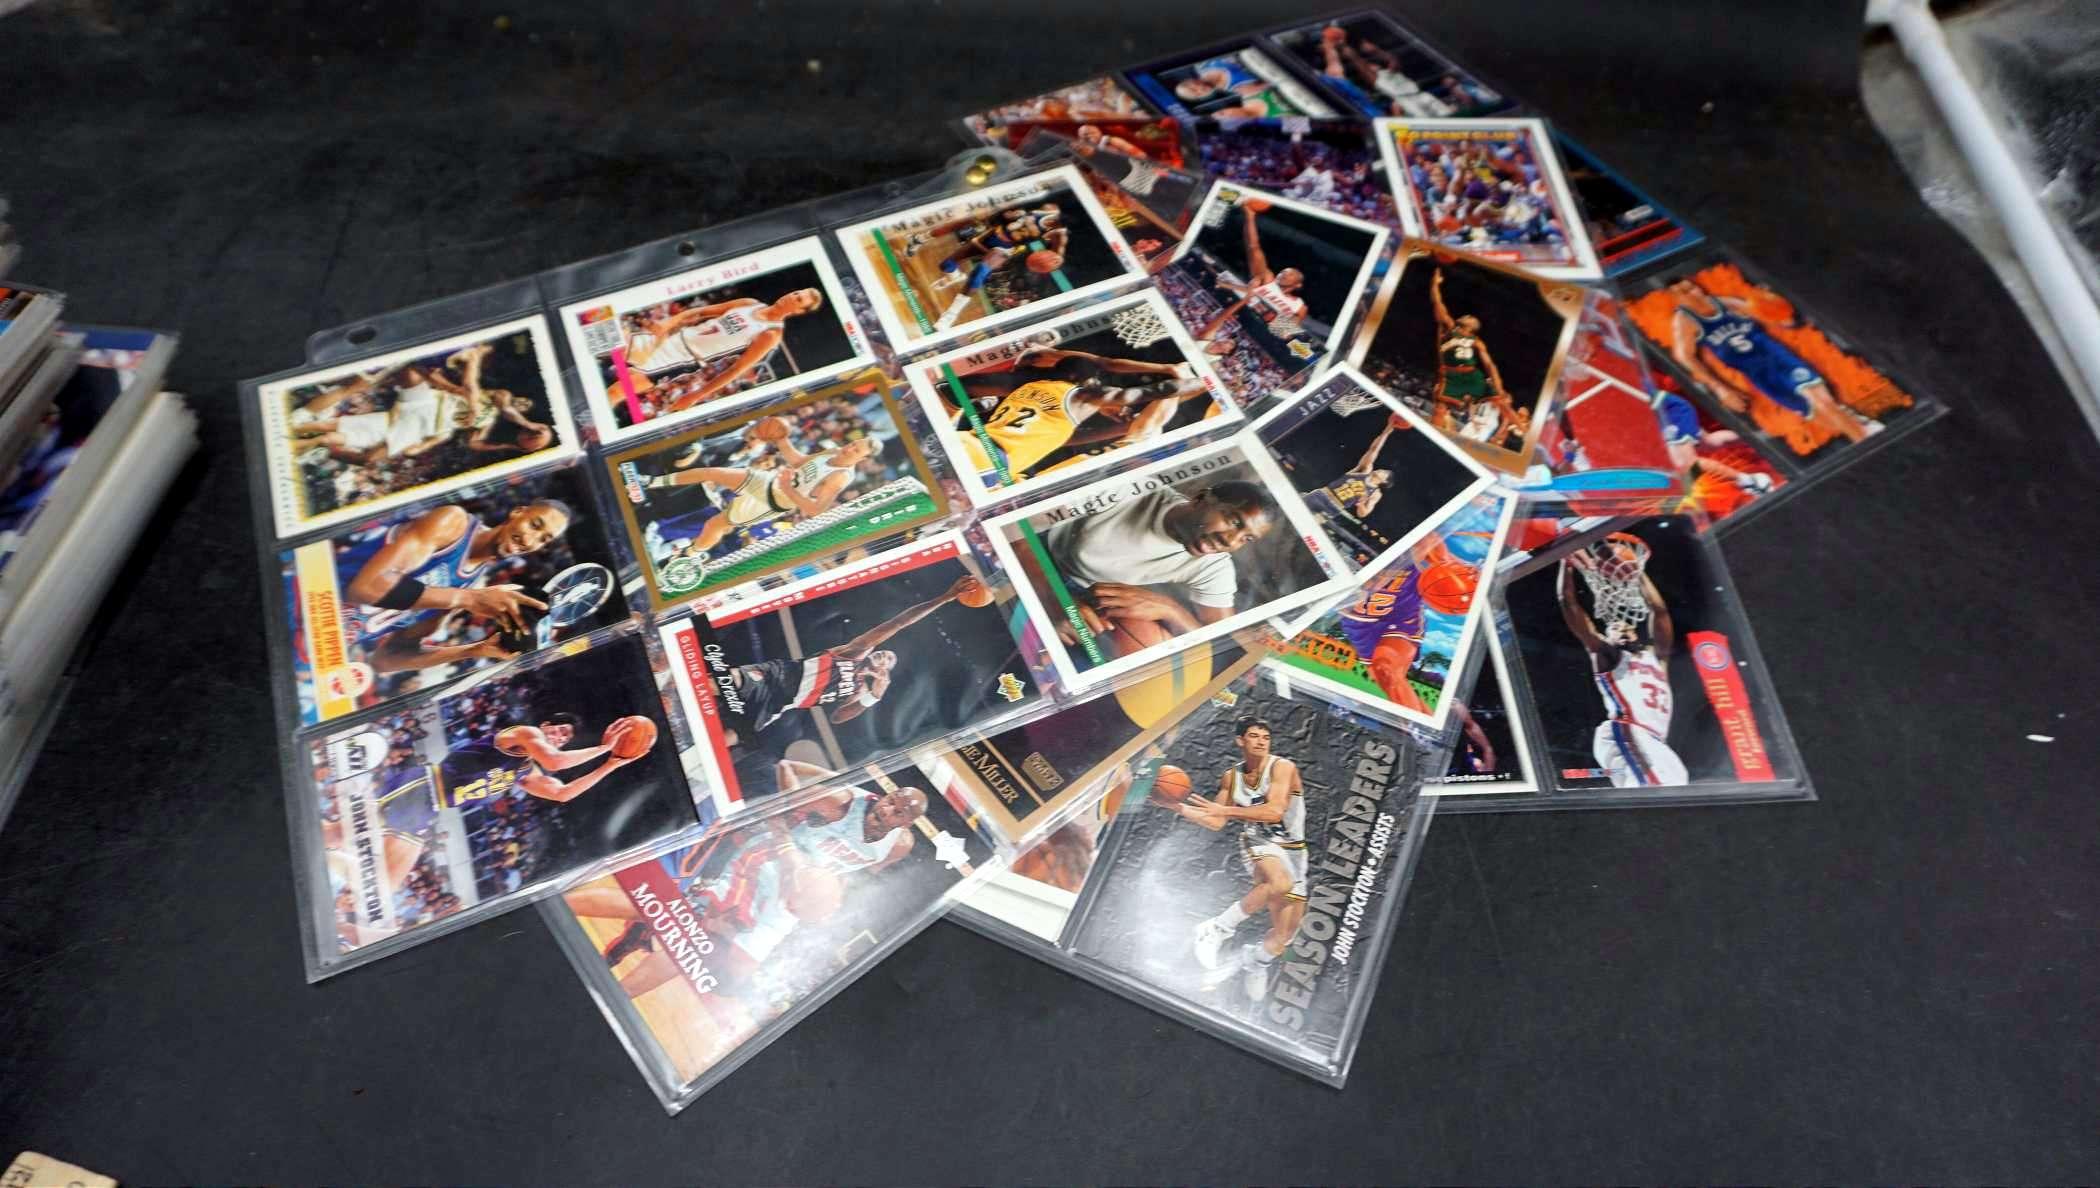 Assorted Basketball Cards